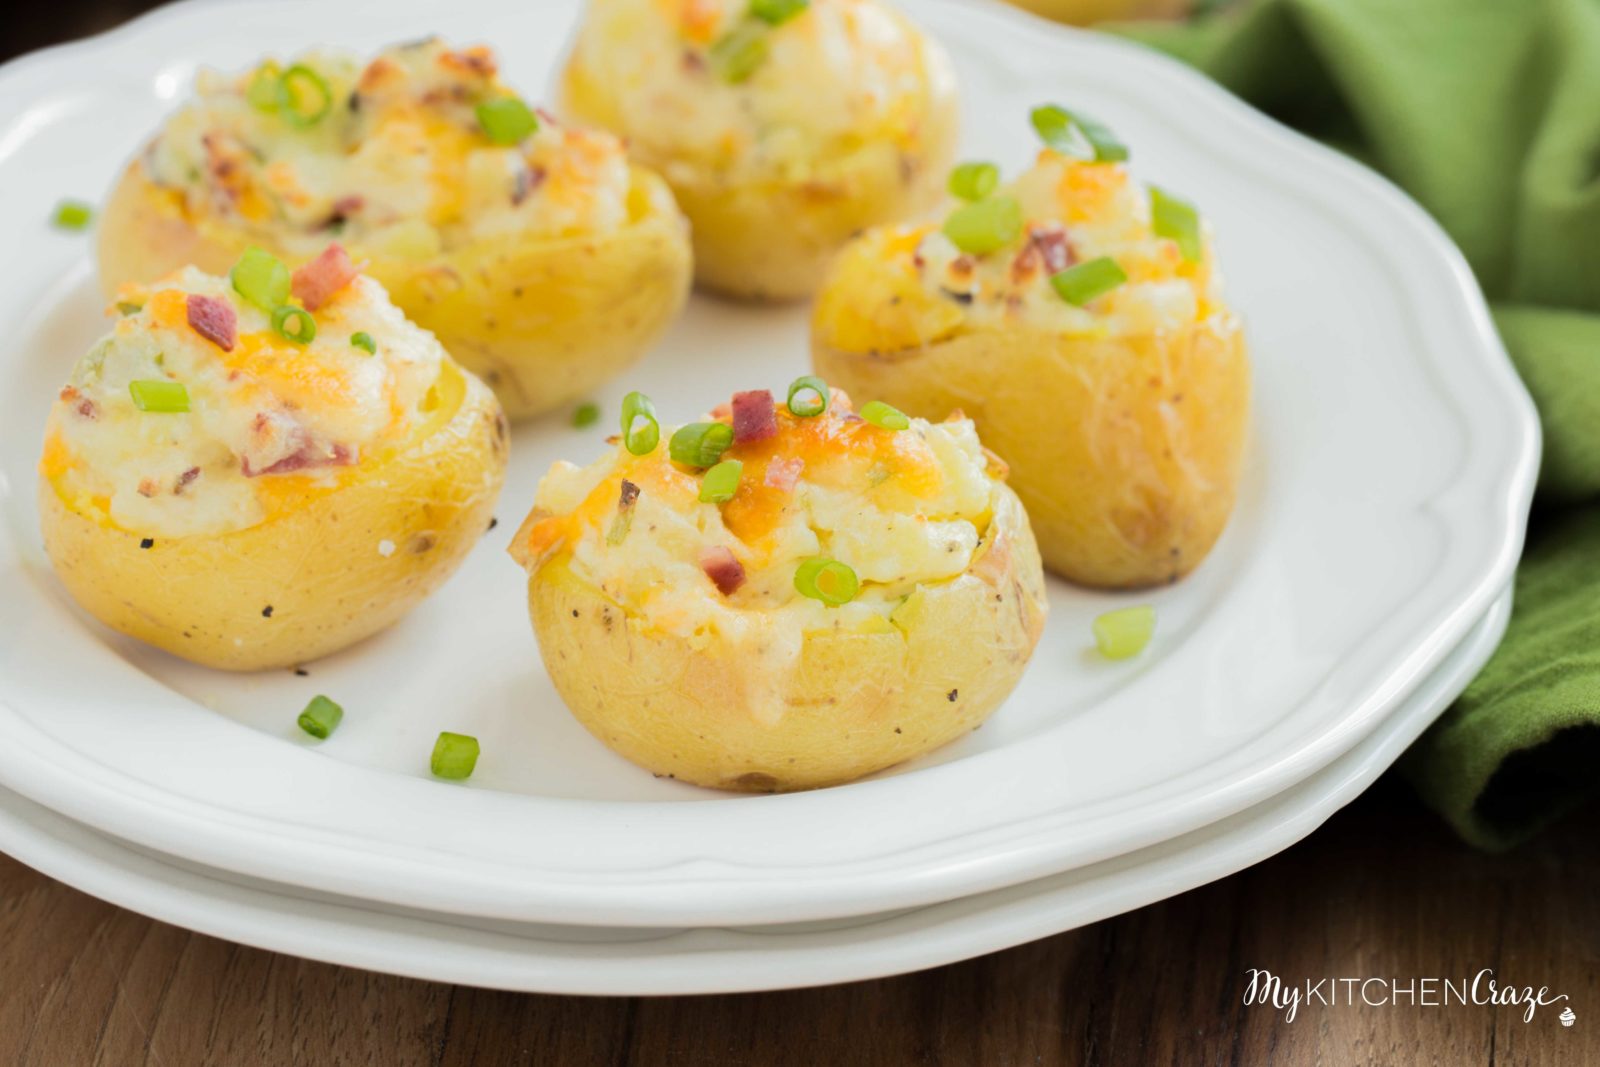 Mini Twice Baked Potatoes ~ Potatoes baked to perfection then loaded with bacon, green onions and cheese. All the yummy things you need for a side! These mini twice baked potatoes are the perfect side.